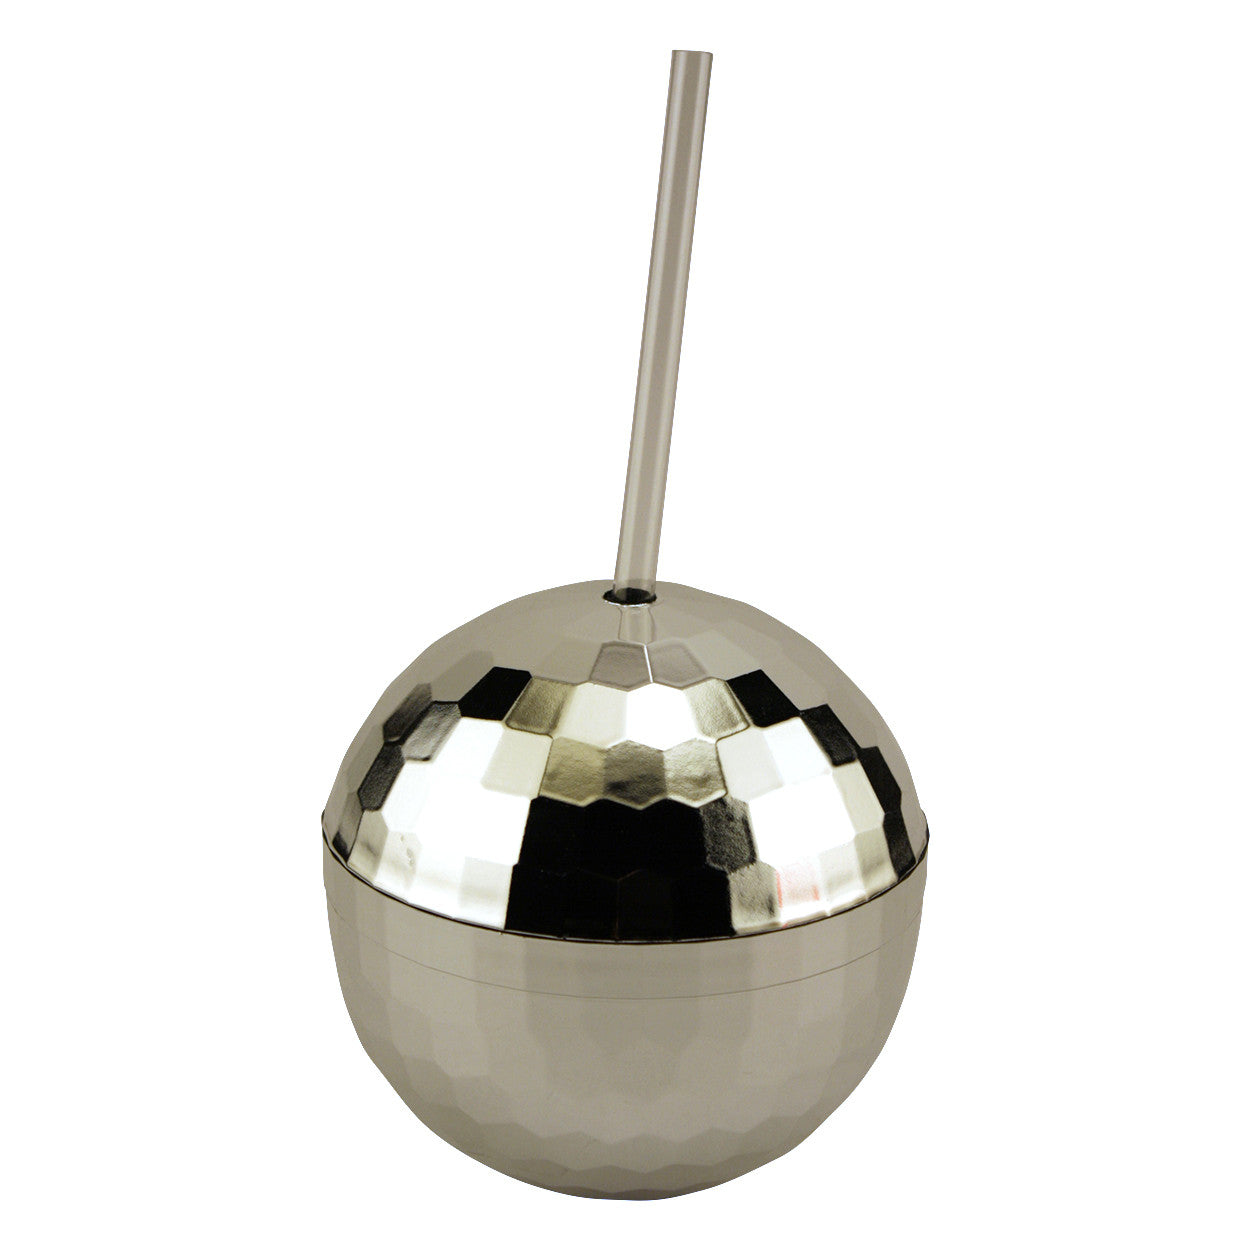 Image of Disco Ball Cup - Holds Her Favorite Drink!